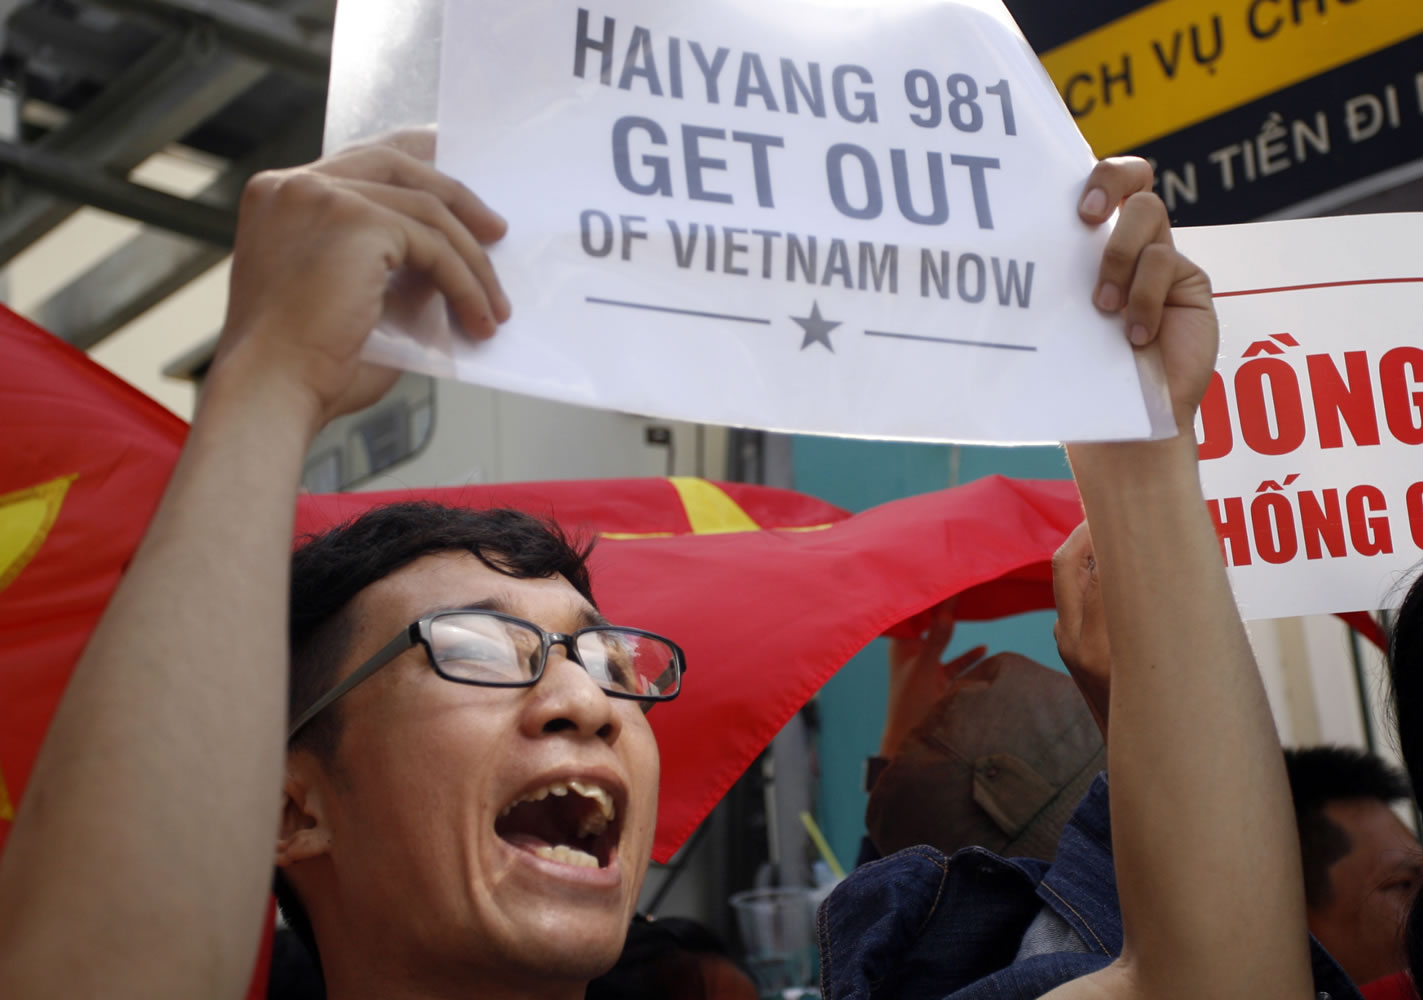 Associated Press
A Vietnamese protester shouts Saturday during a protest rally against China outside the Chinese Consulate in Ho Chi Minh City, Vietnam.